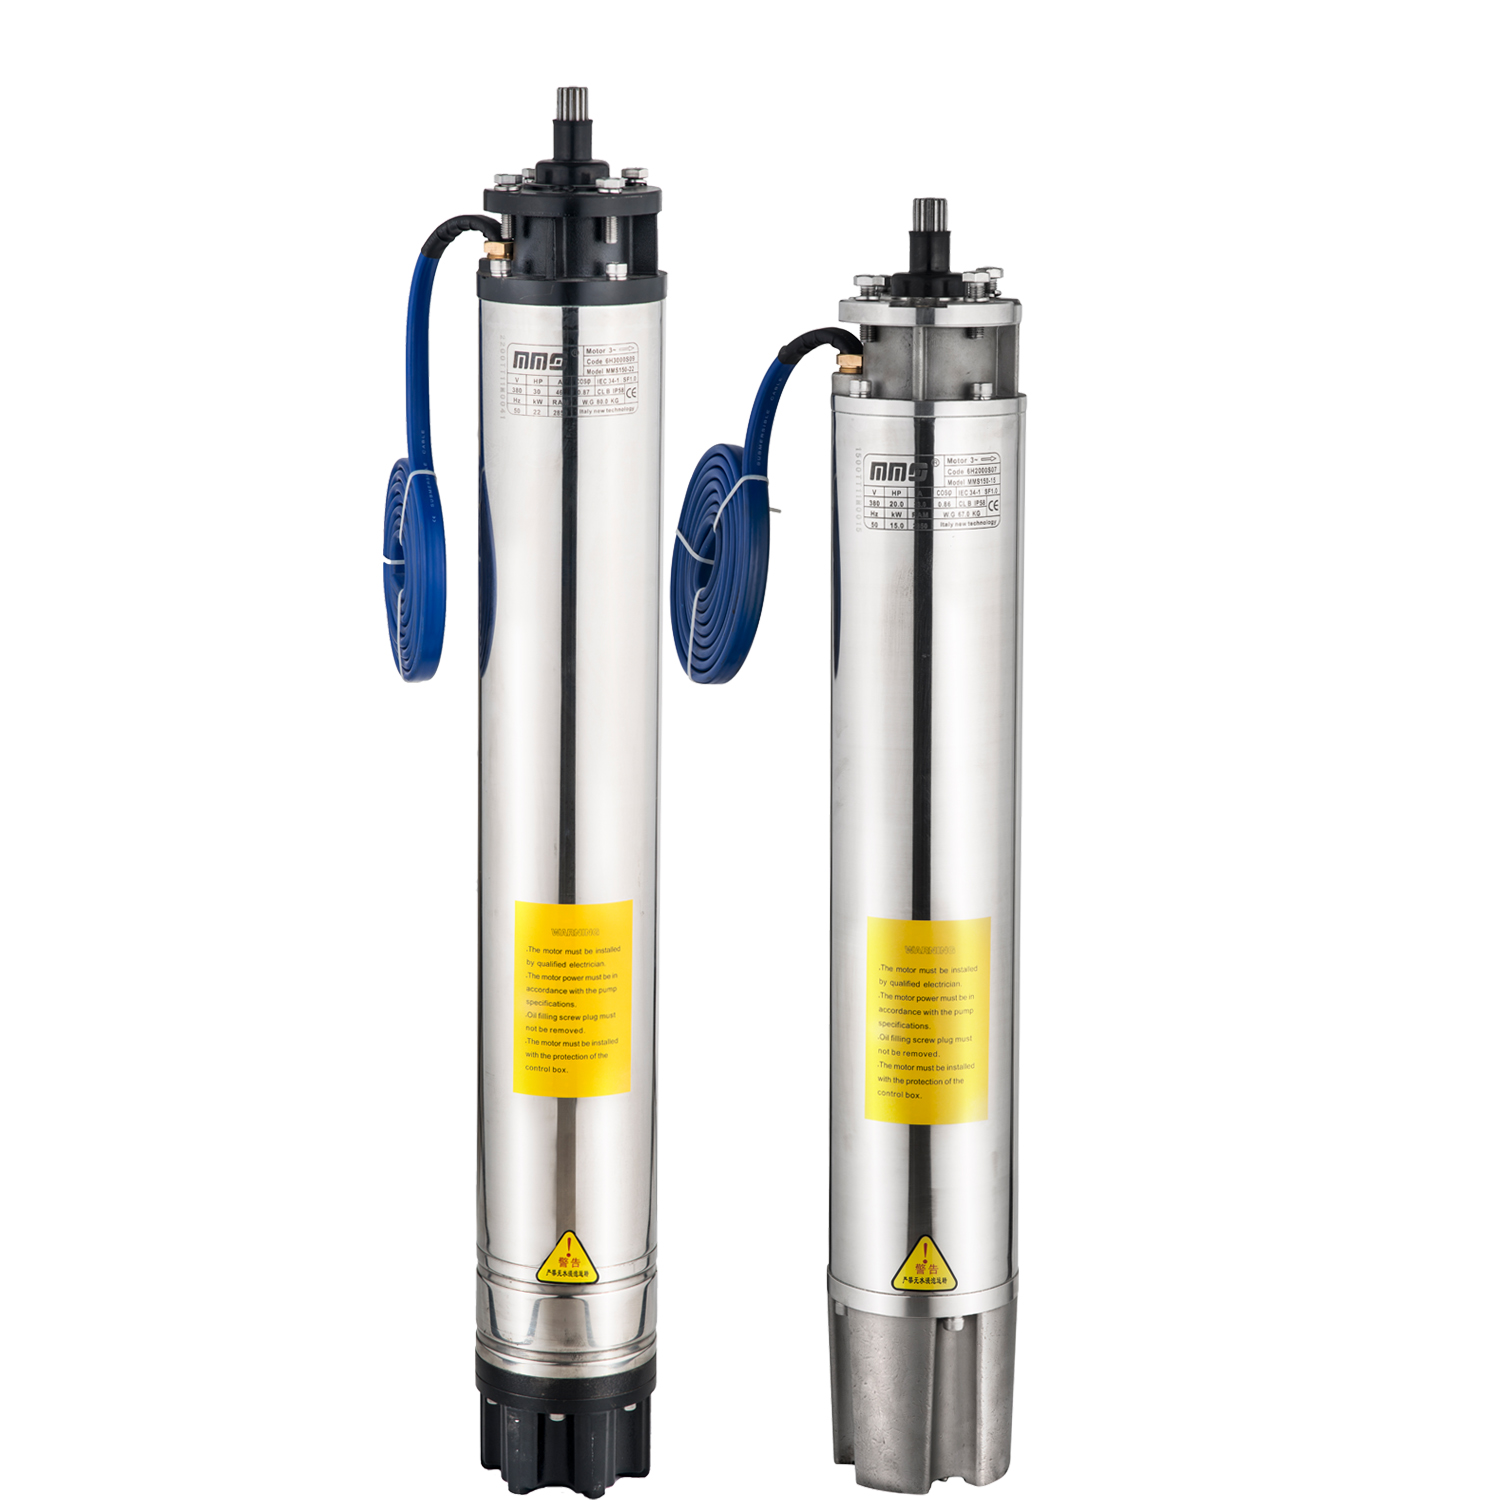 Italy Deep Well Submersible Borehole Pump Machine 4 Inch Diameter